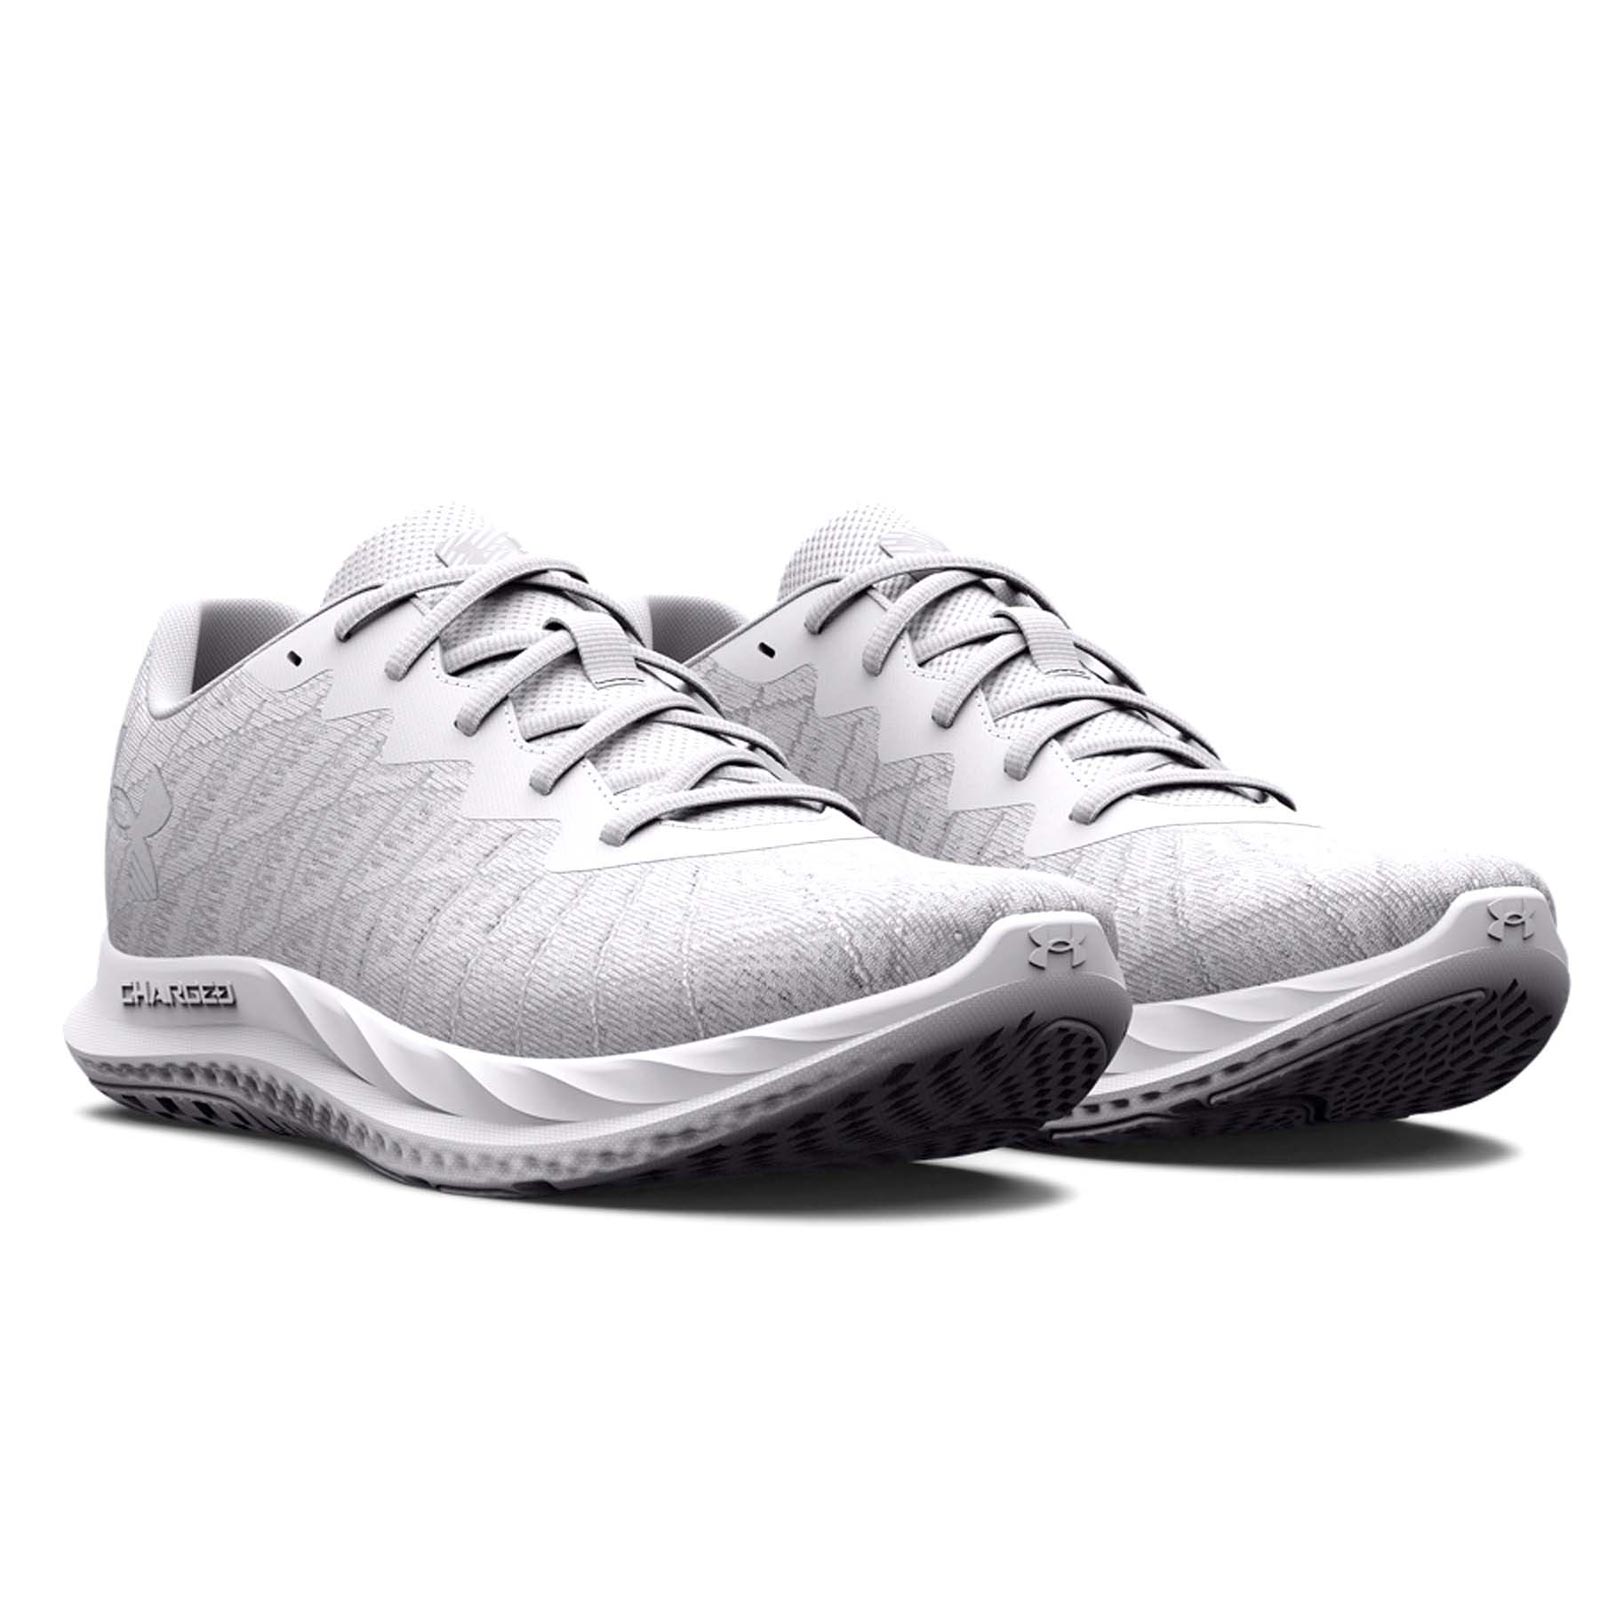 UNDER ARMOUR CHARGED BREEZE 2 WOMENS RUNNING SHOES